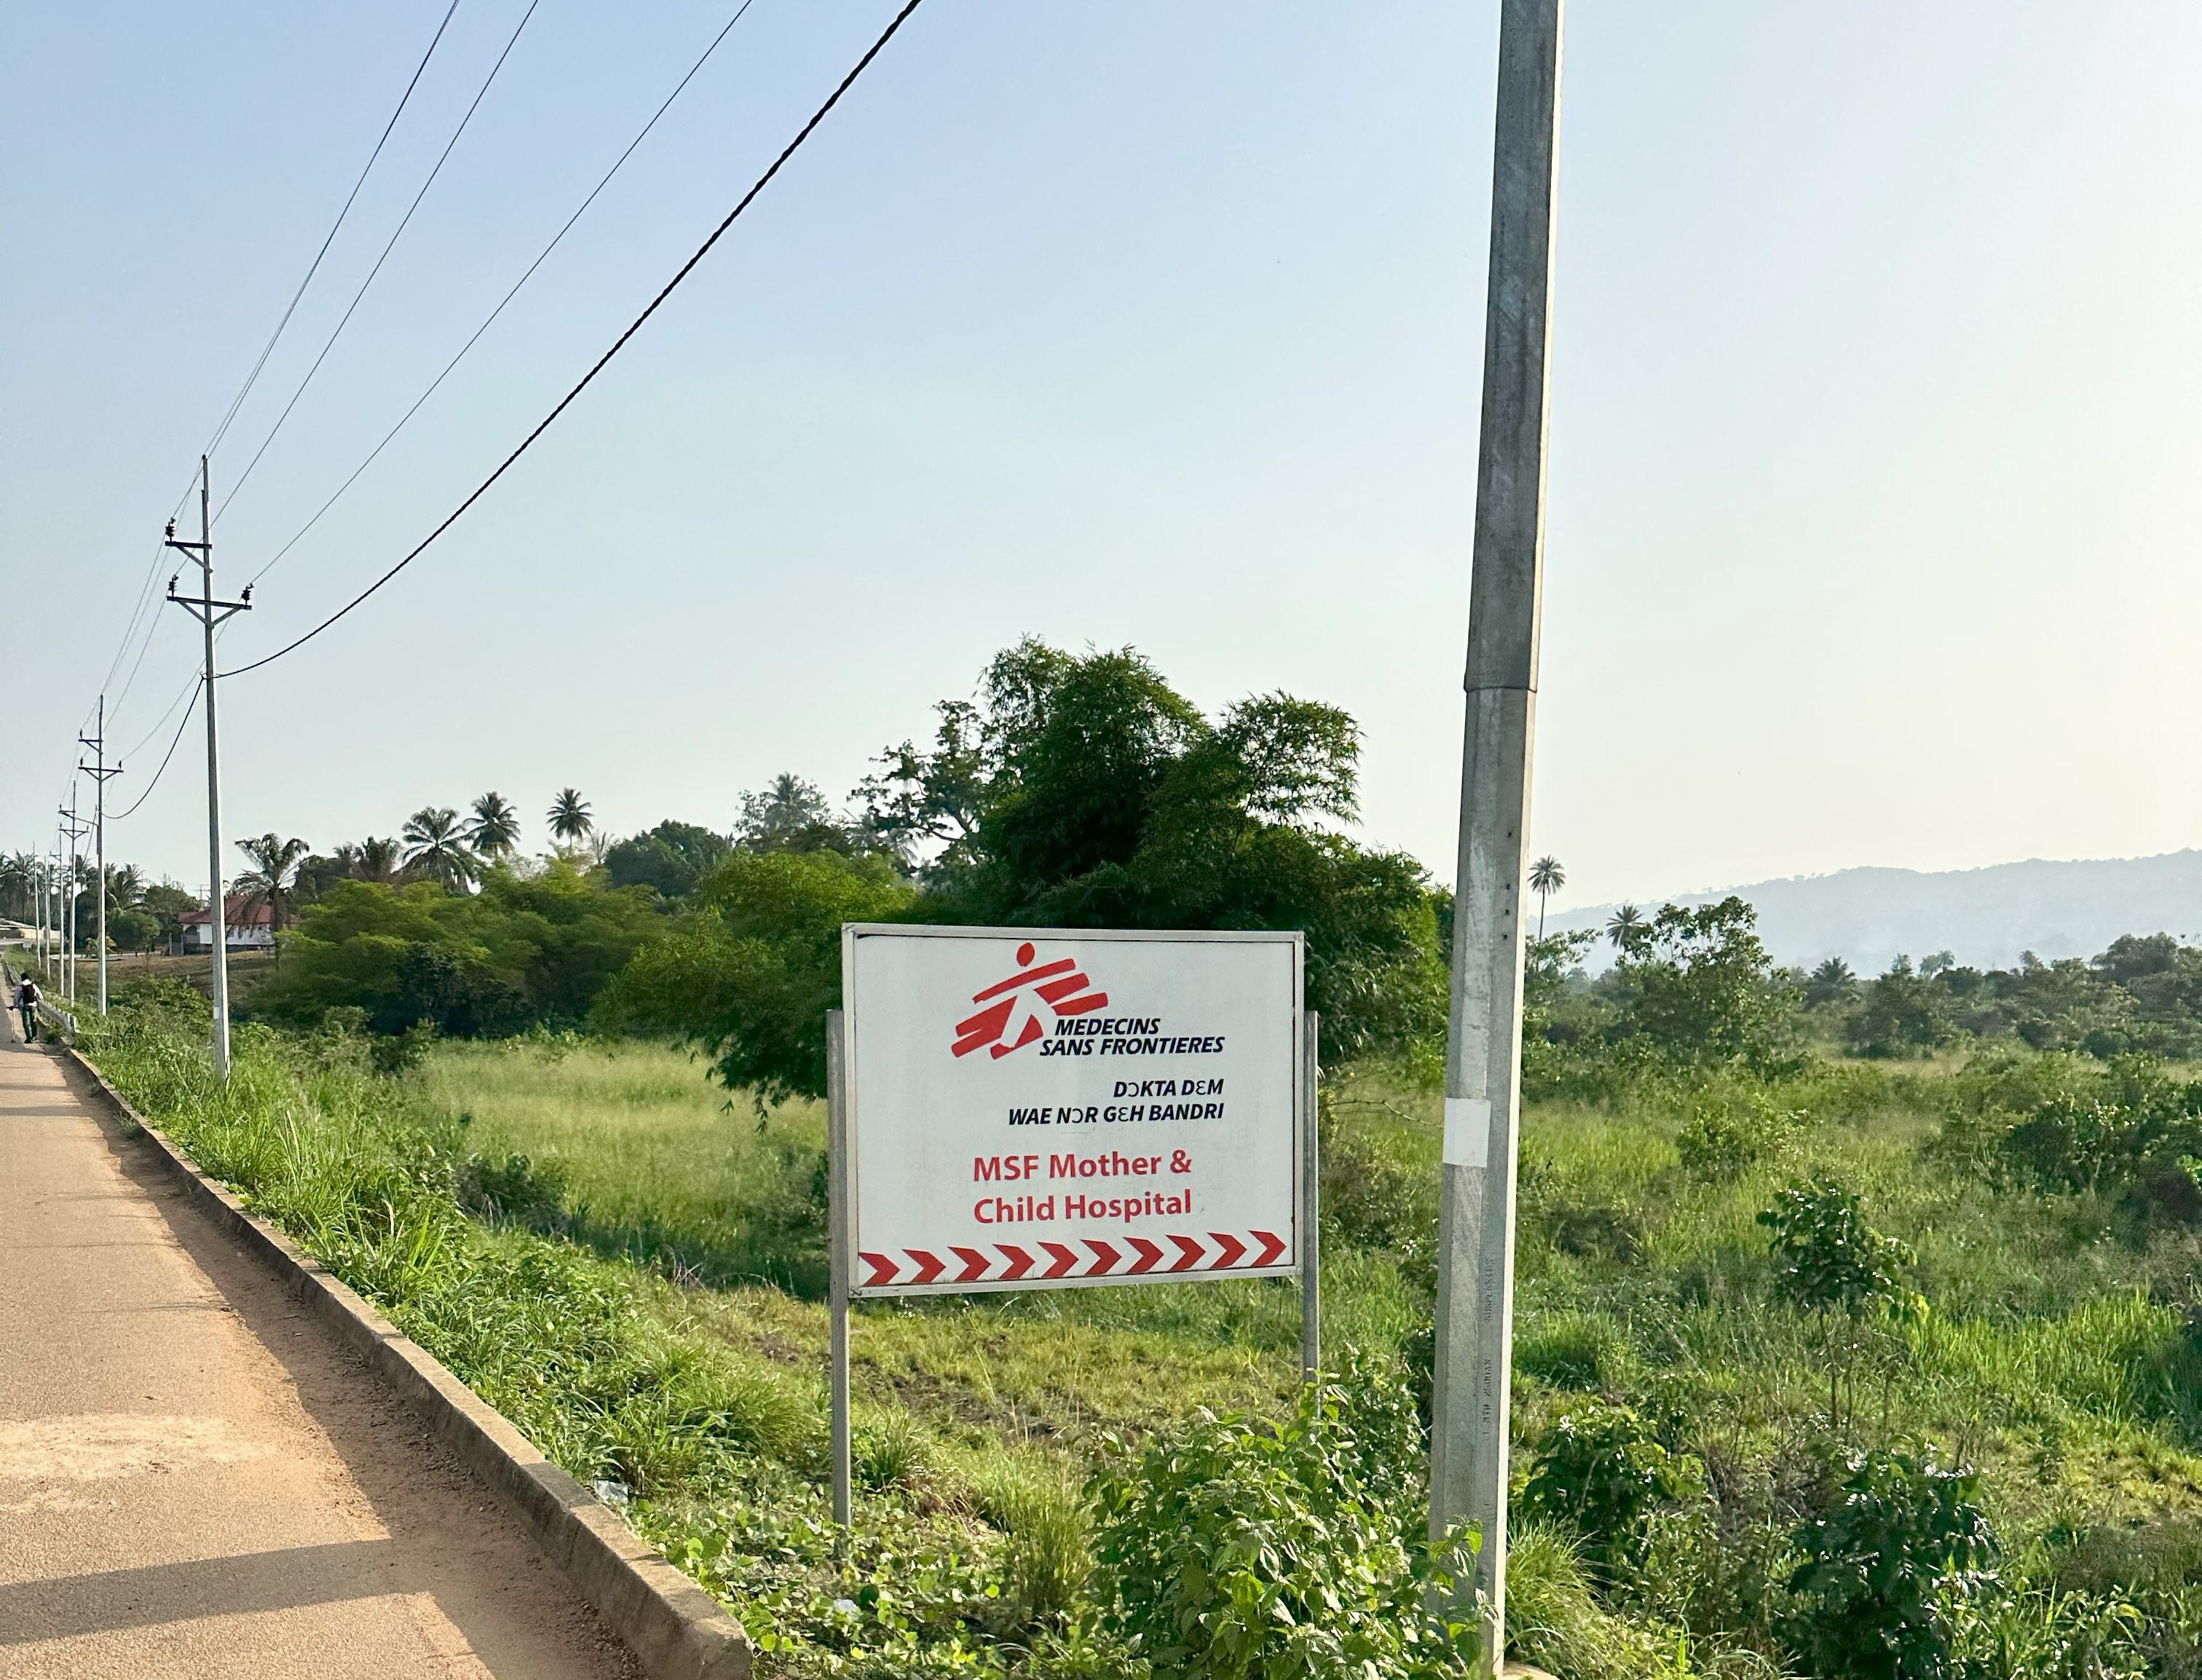 MSF mother & child hospital